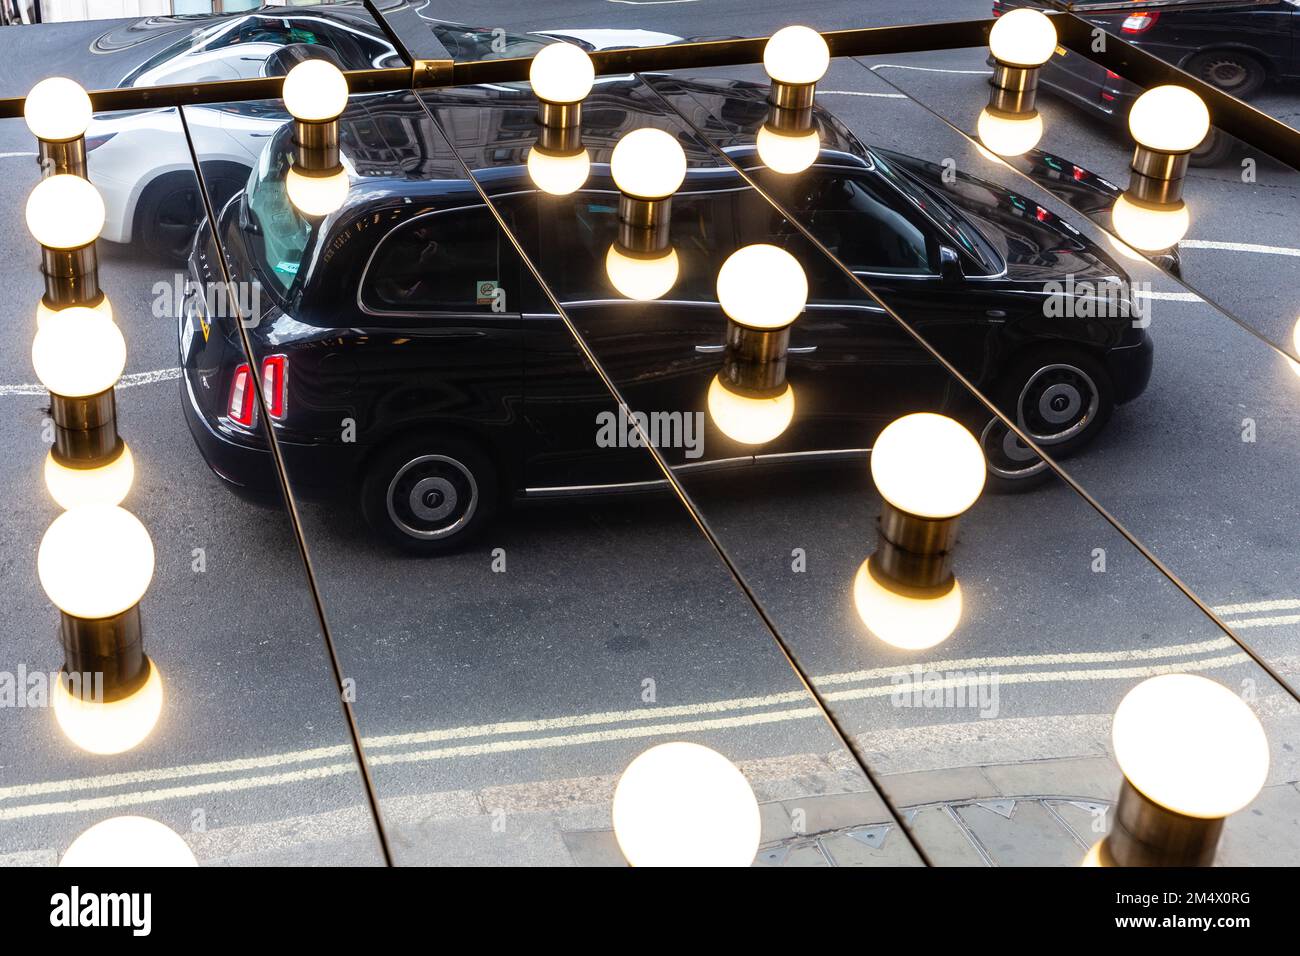 A Black london Cab is reflected in theatre lights shining into mirrors on the theatre ceiling.An unusual image and a unique angle of a London Taxi Stock Photo